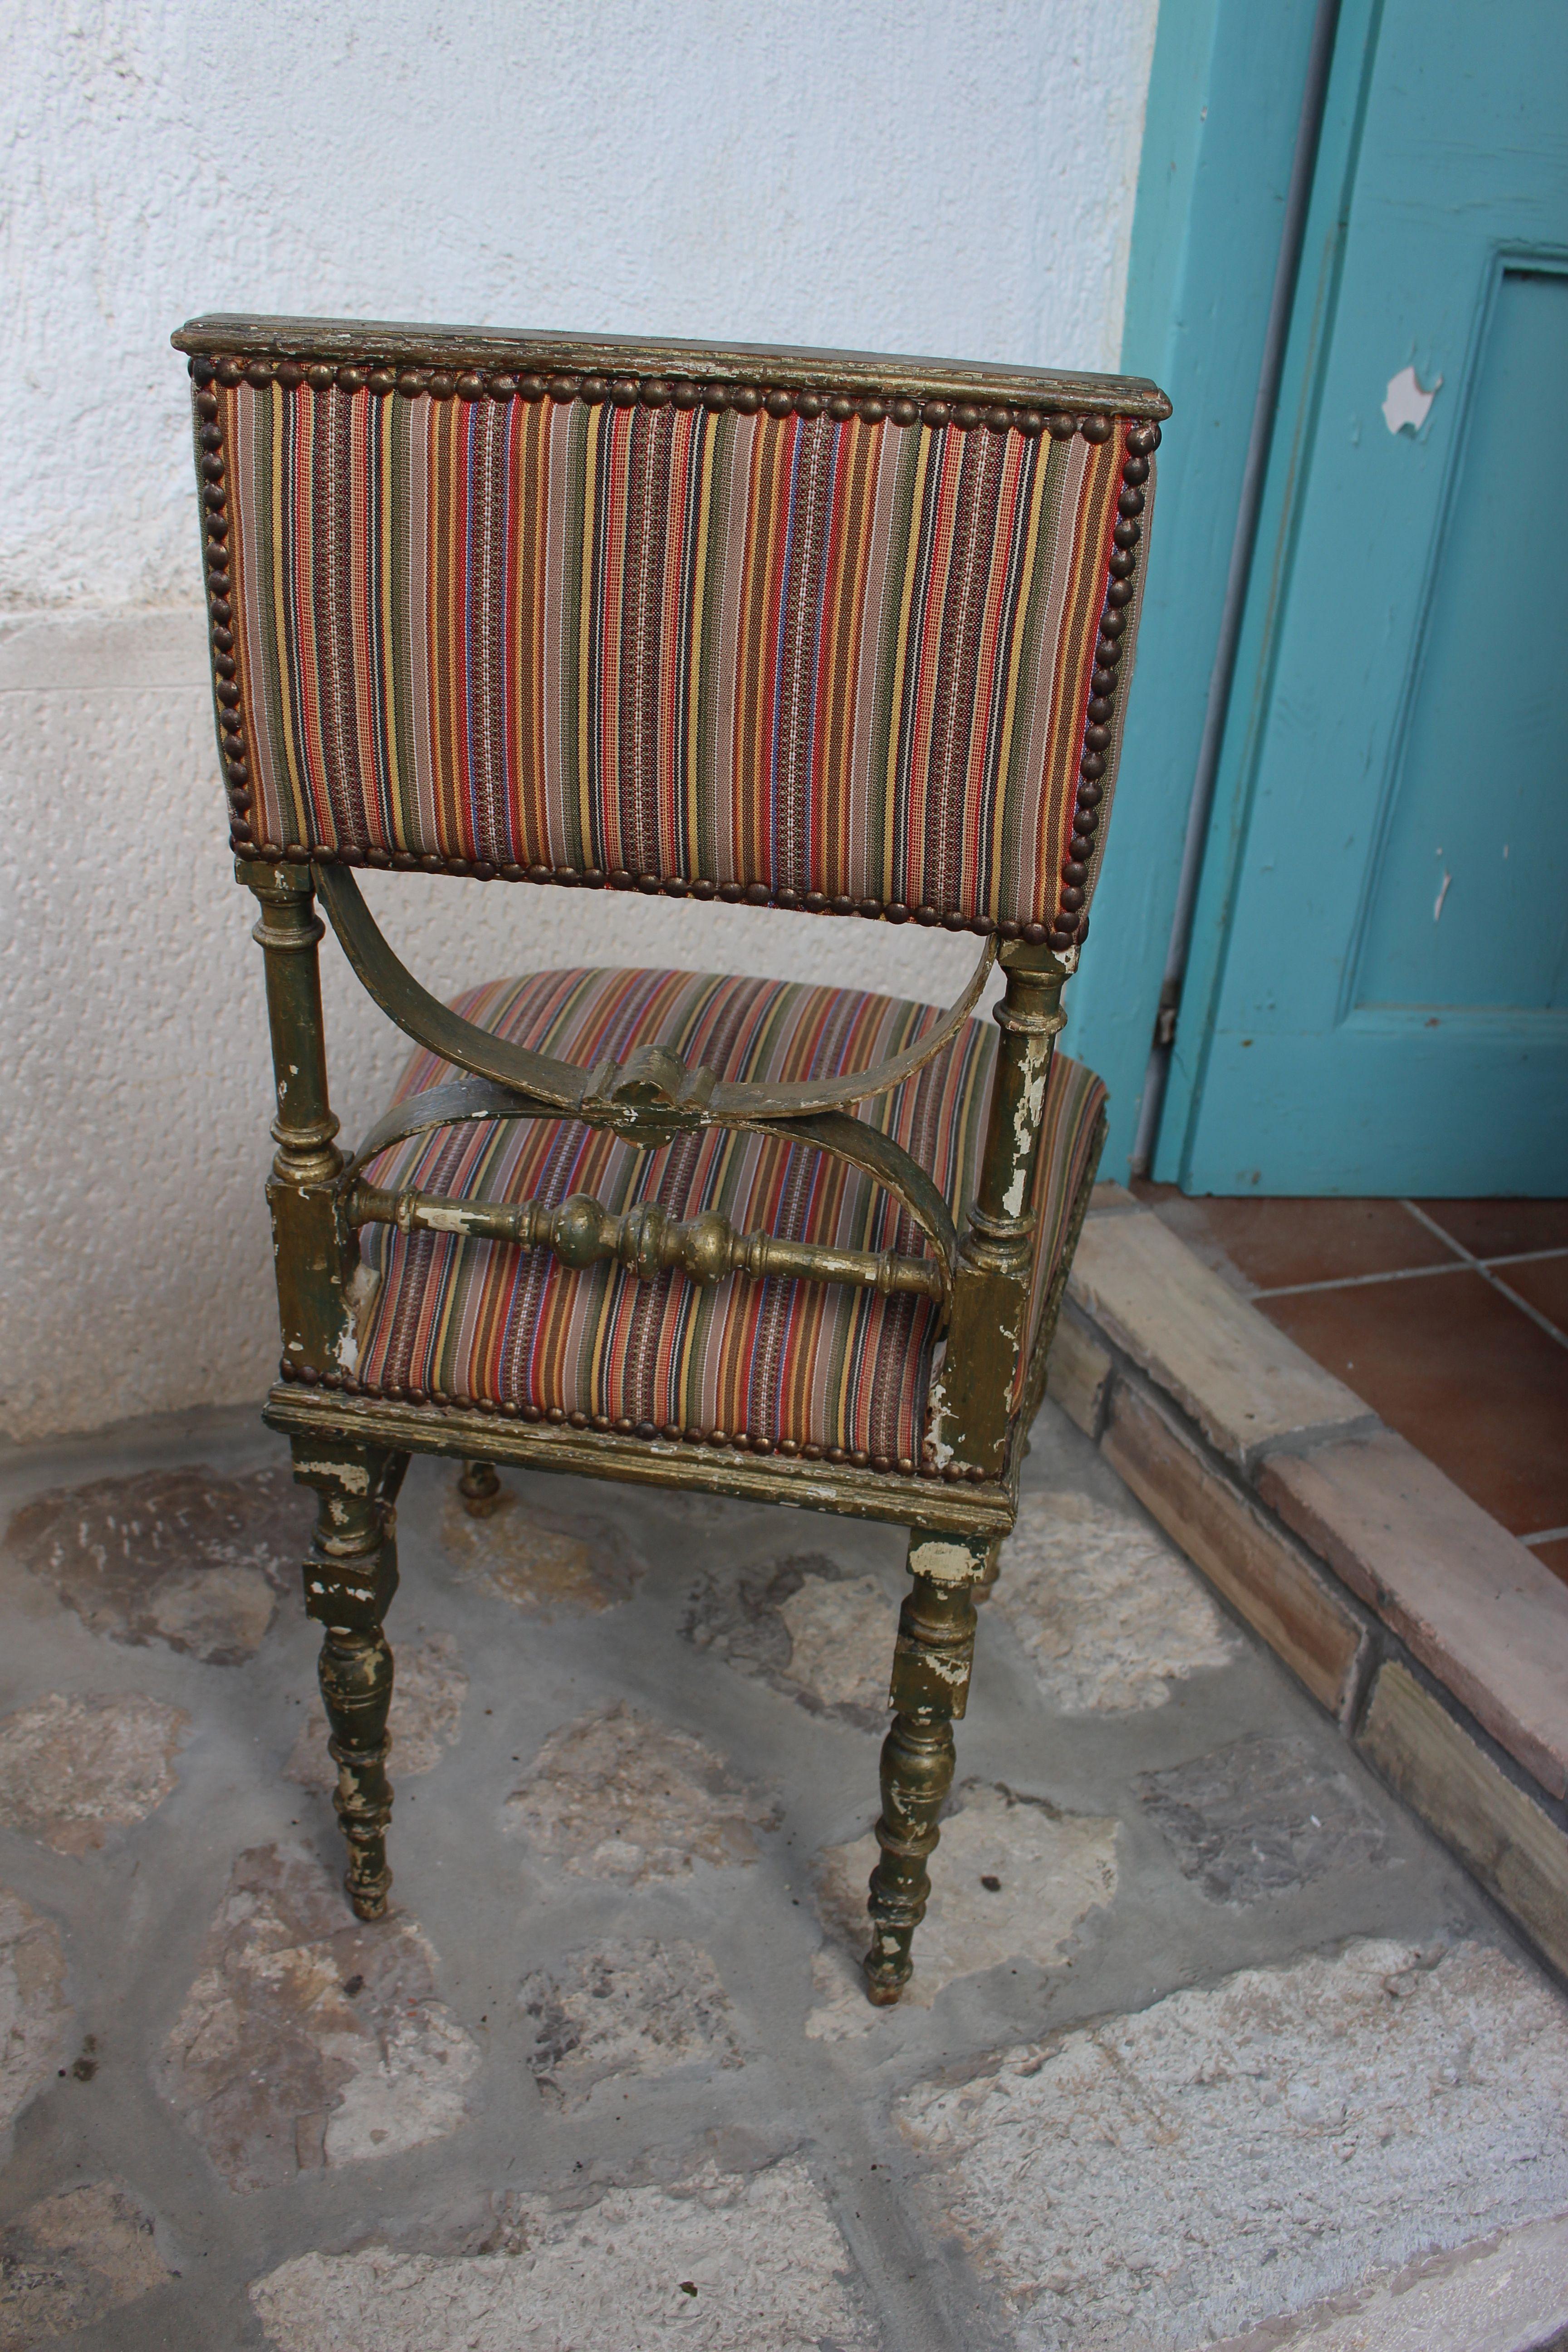 Italian neoclassical chair reupholstered in hand made Italian folkloric material from the period. Wood is original condition with the exceptional patina and never used upholstery material.